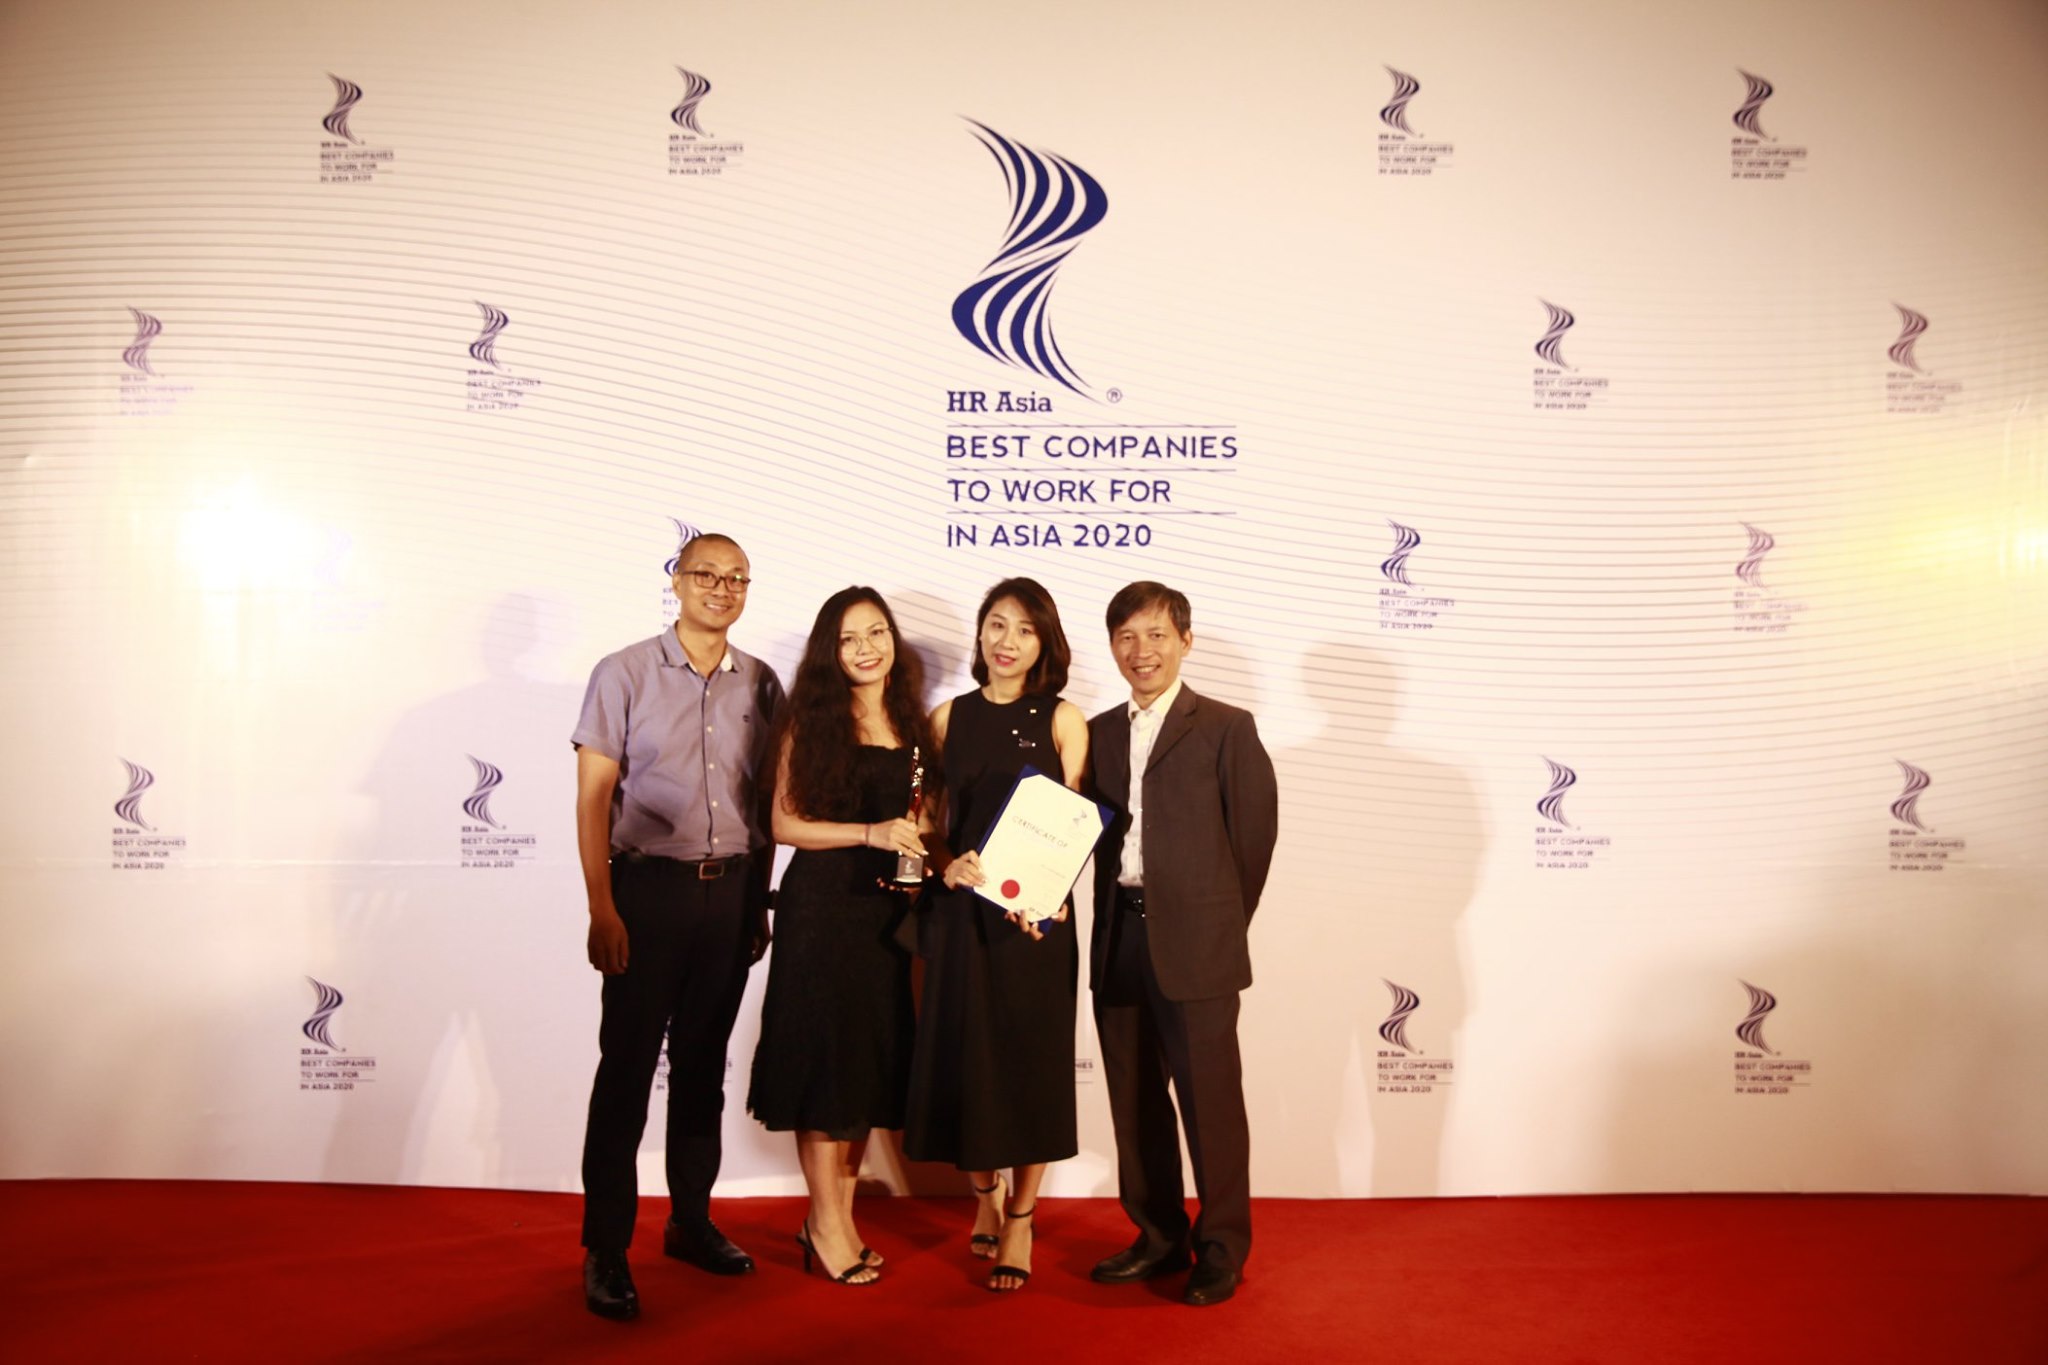 CMC honored as one of the companies with best working environment in Asia in 2020